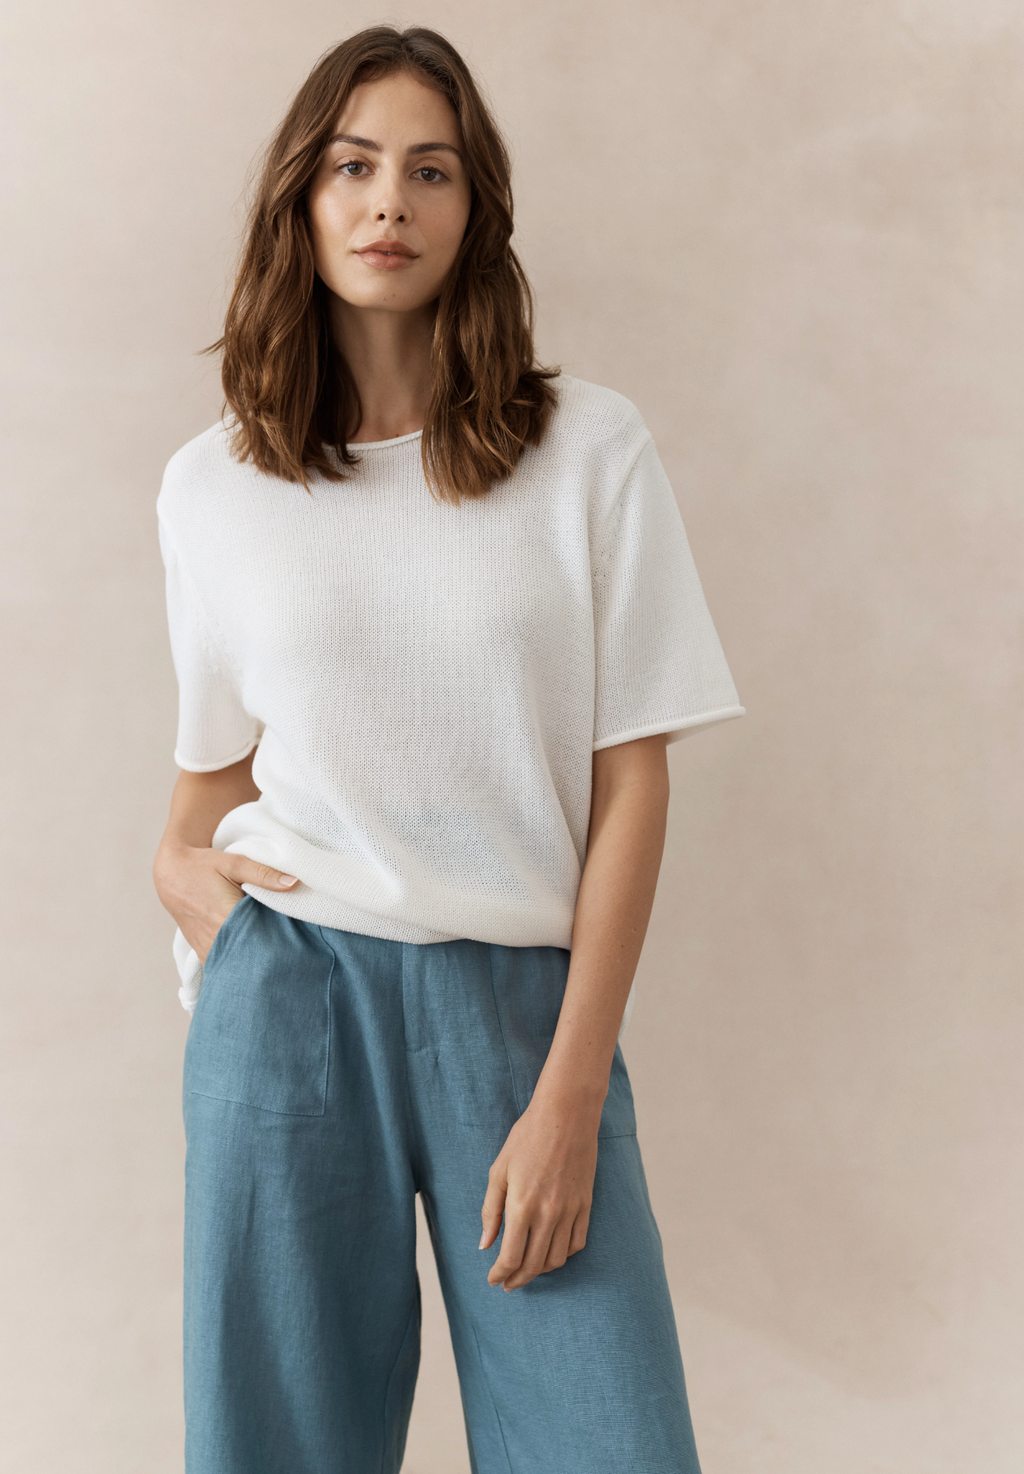 the spring tee by little lies is a knitted cotton linen blend t-shirt in white